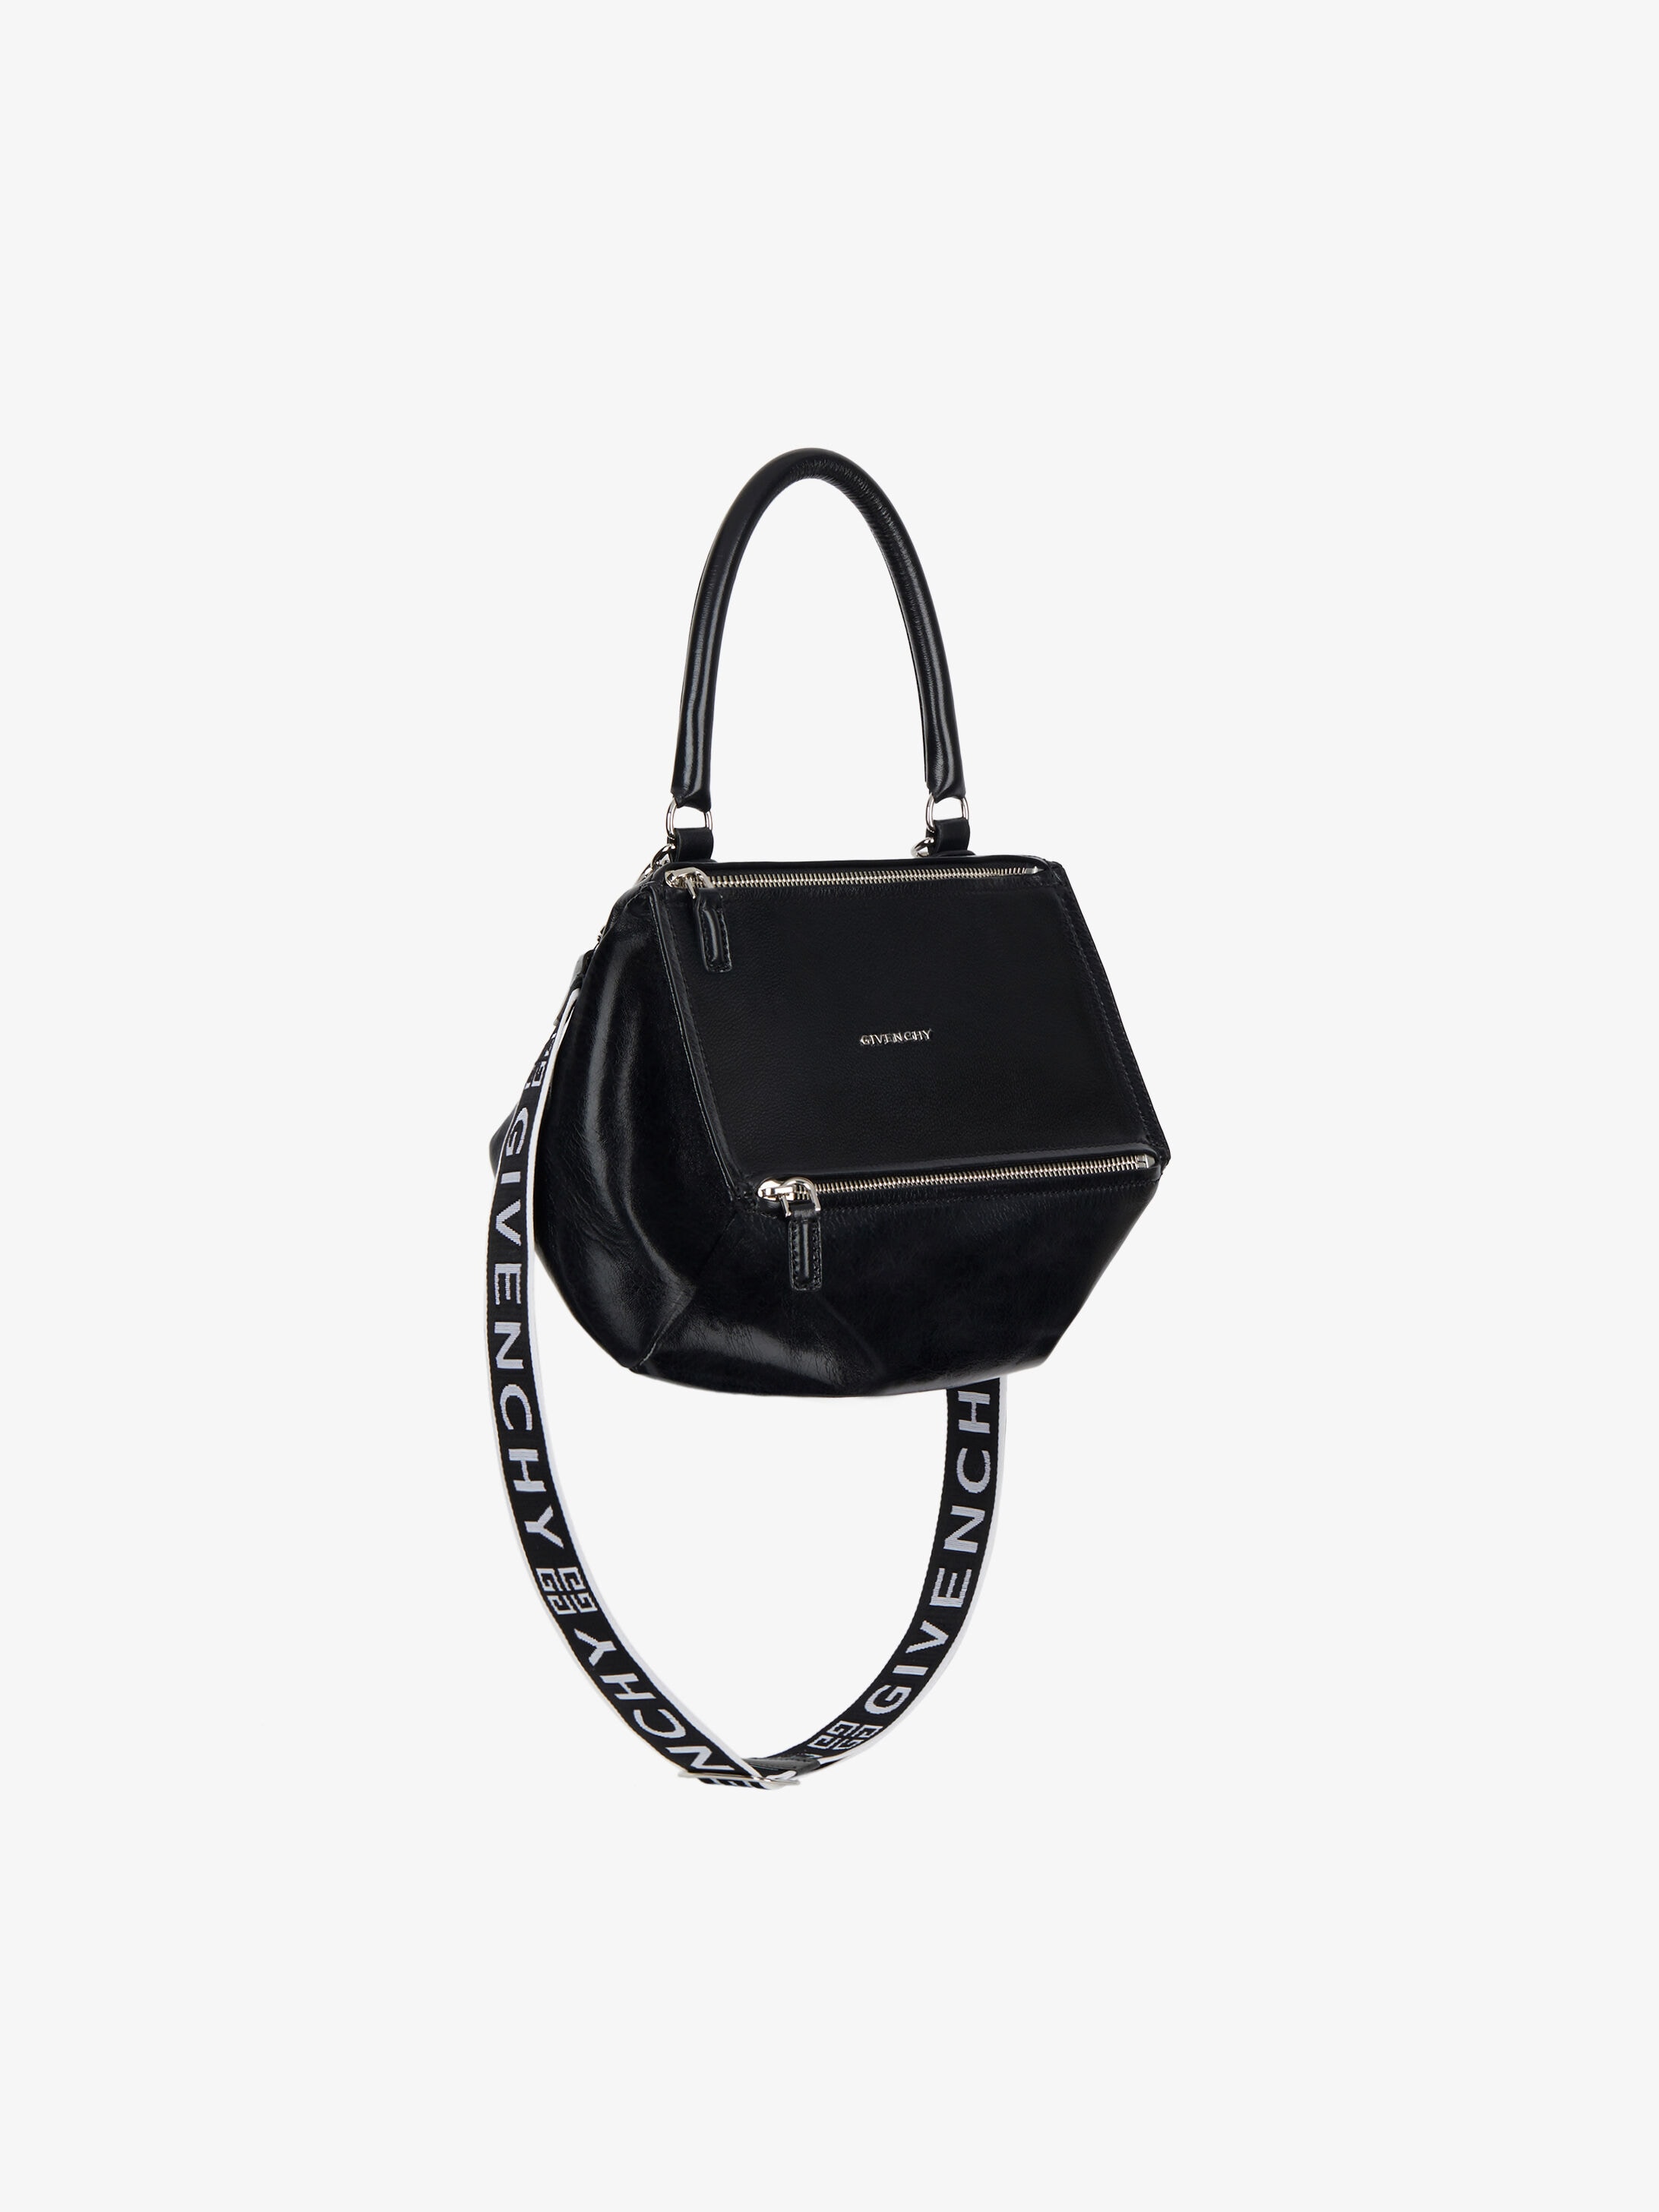 givenchy patent leather bag